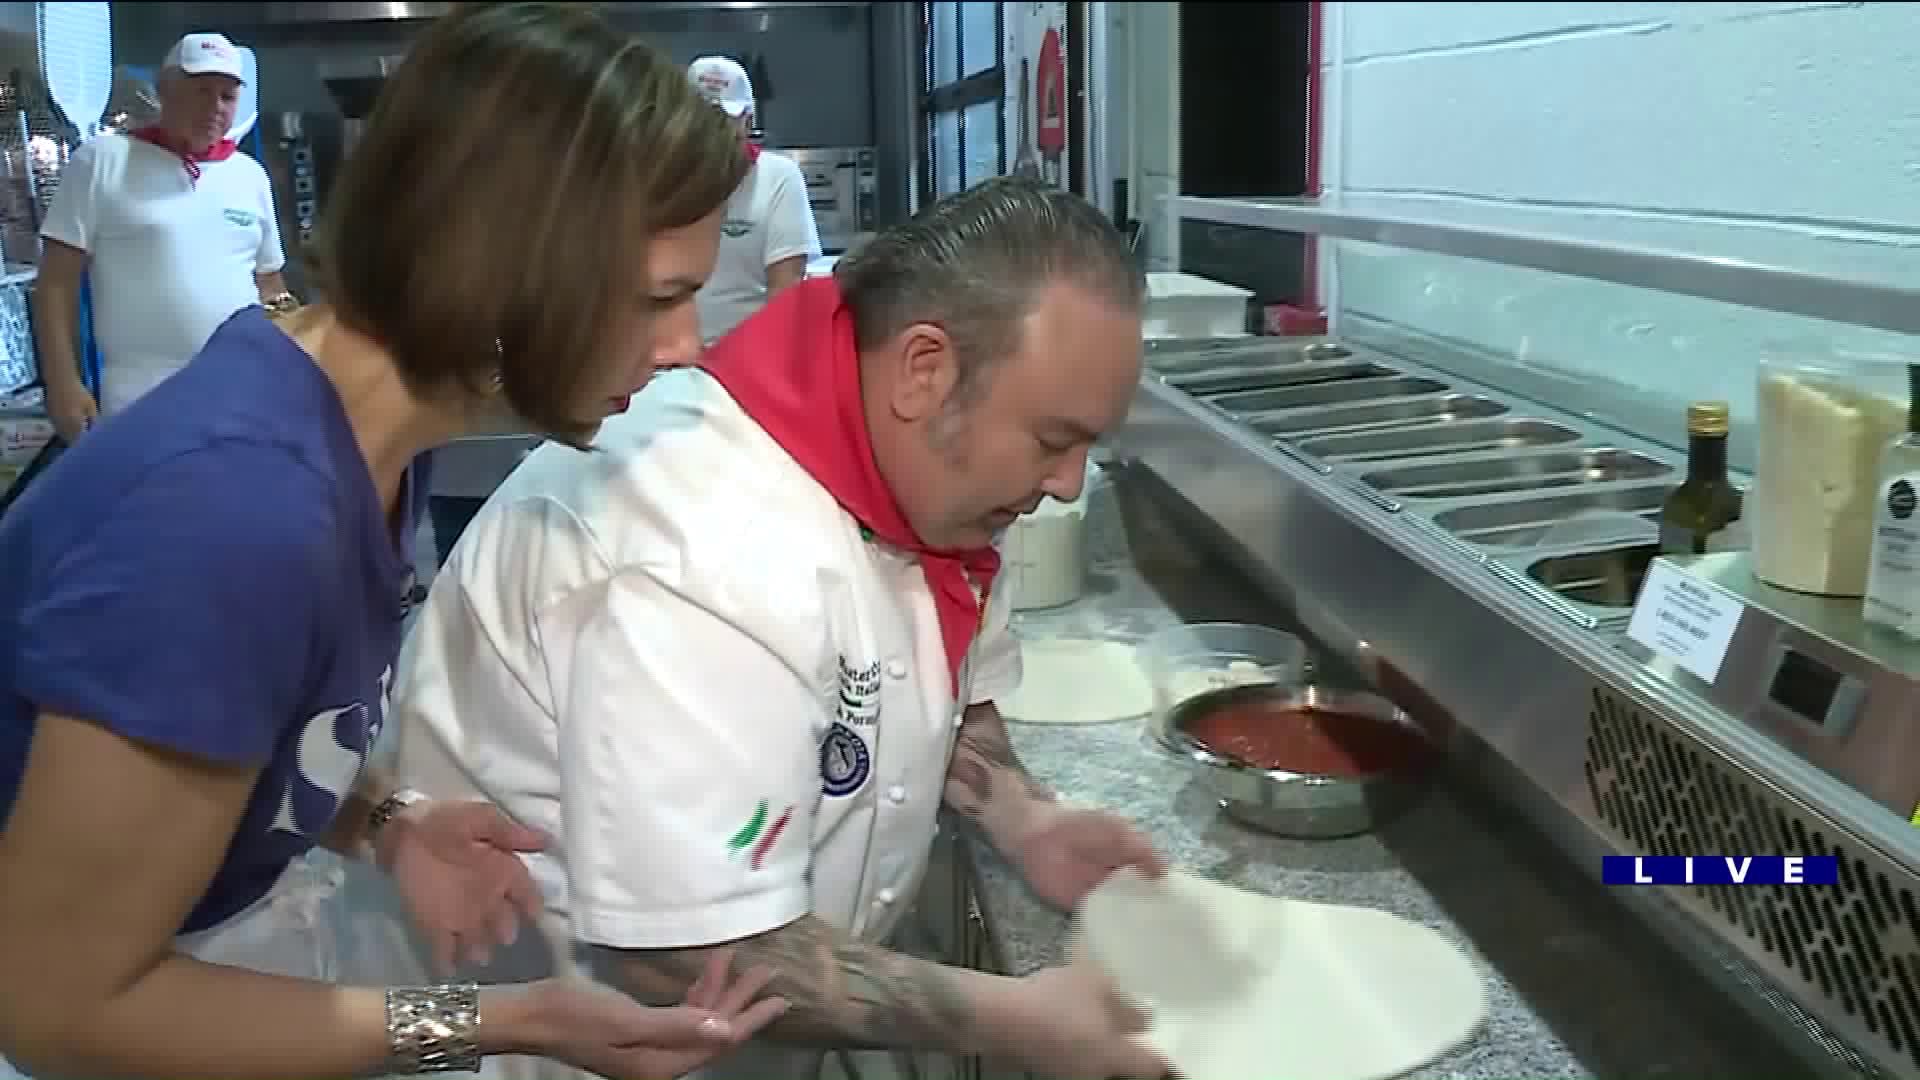 Around Town checks out North American Pizza and Culinary Academy